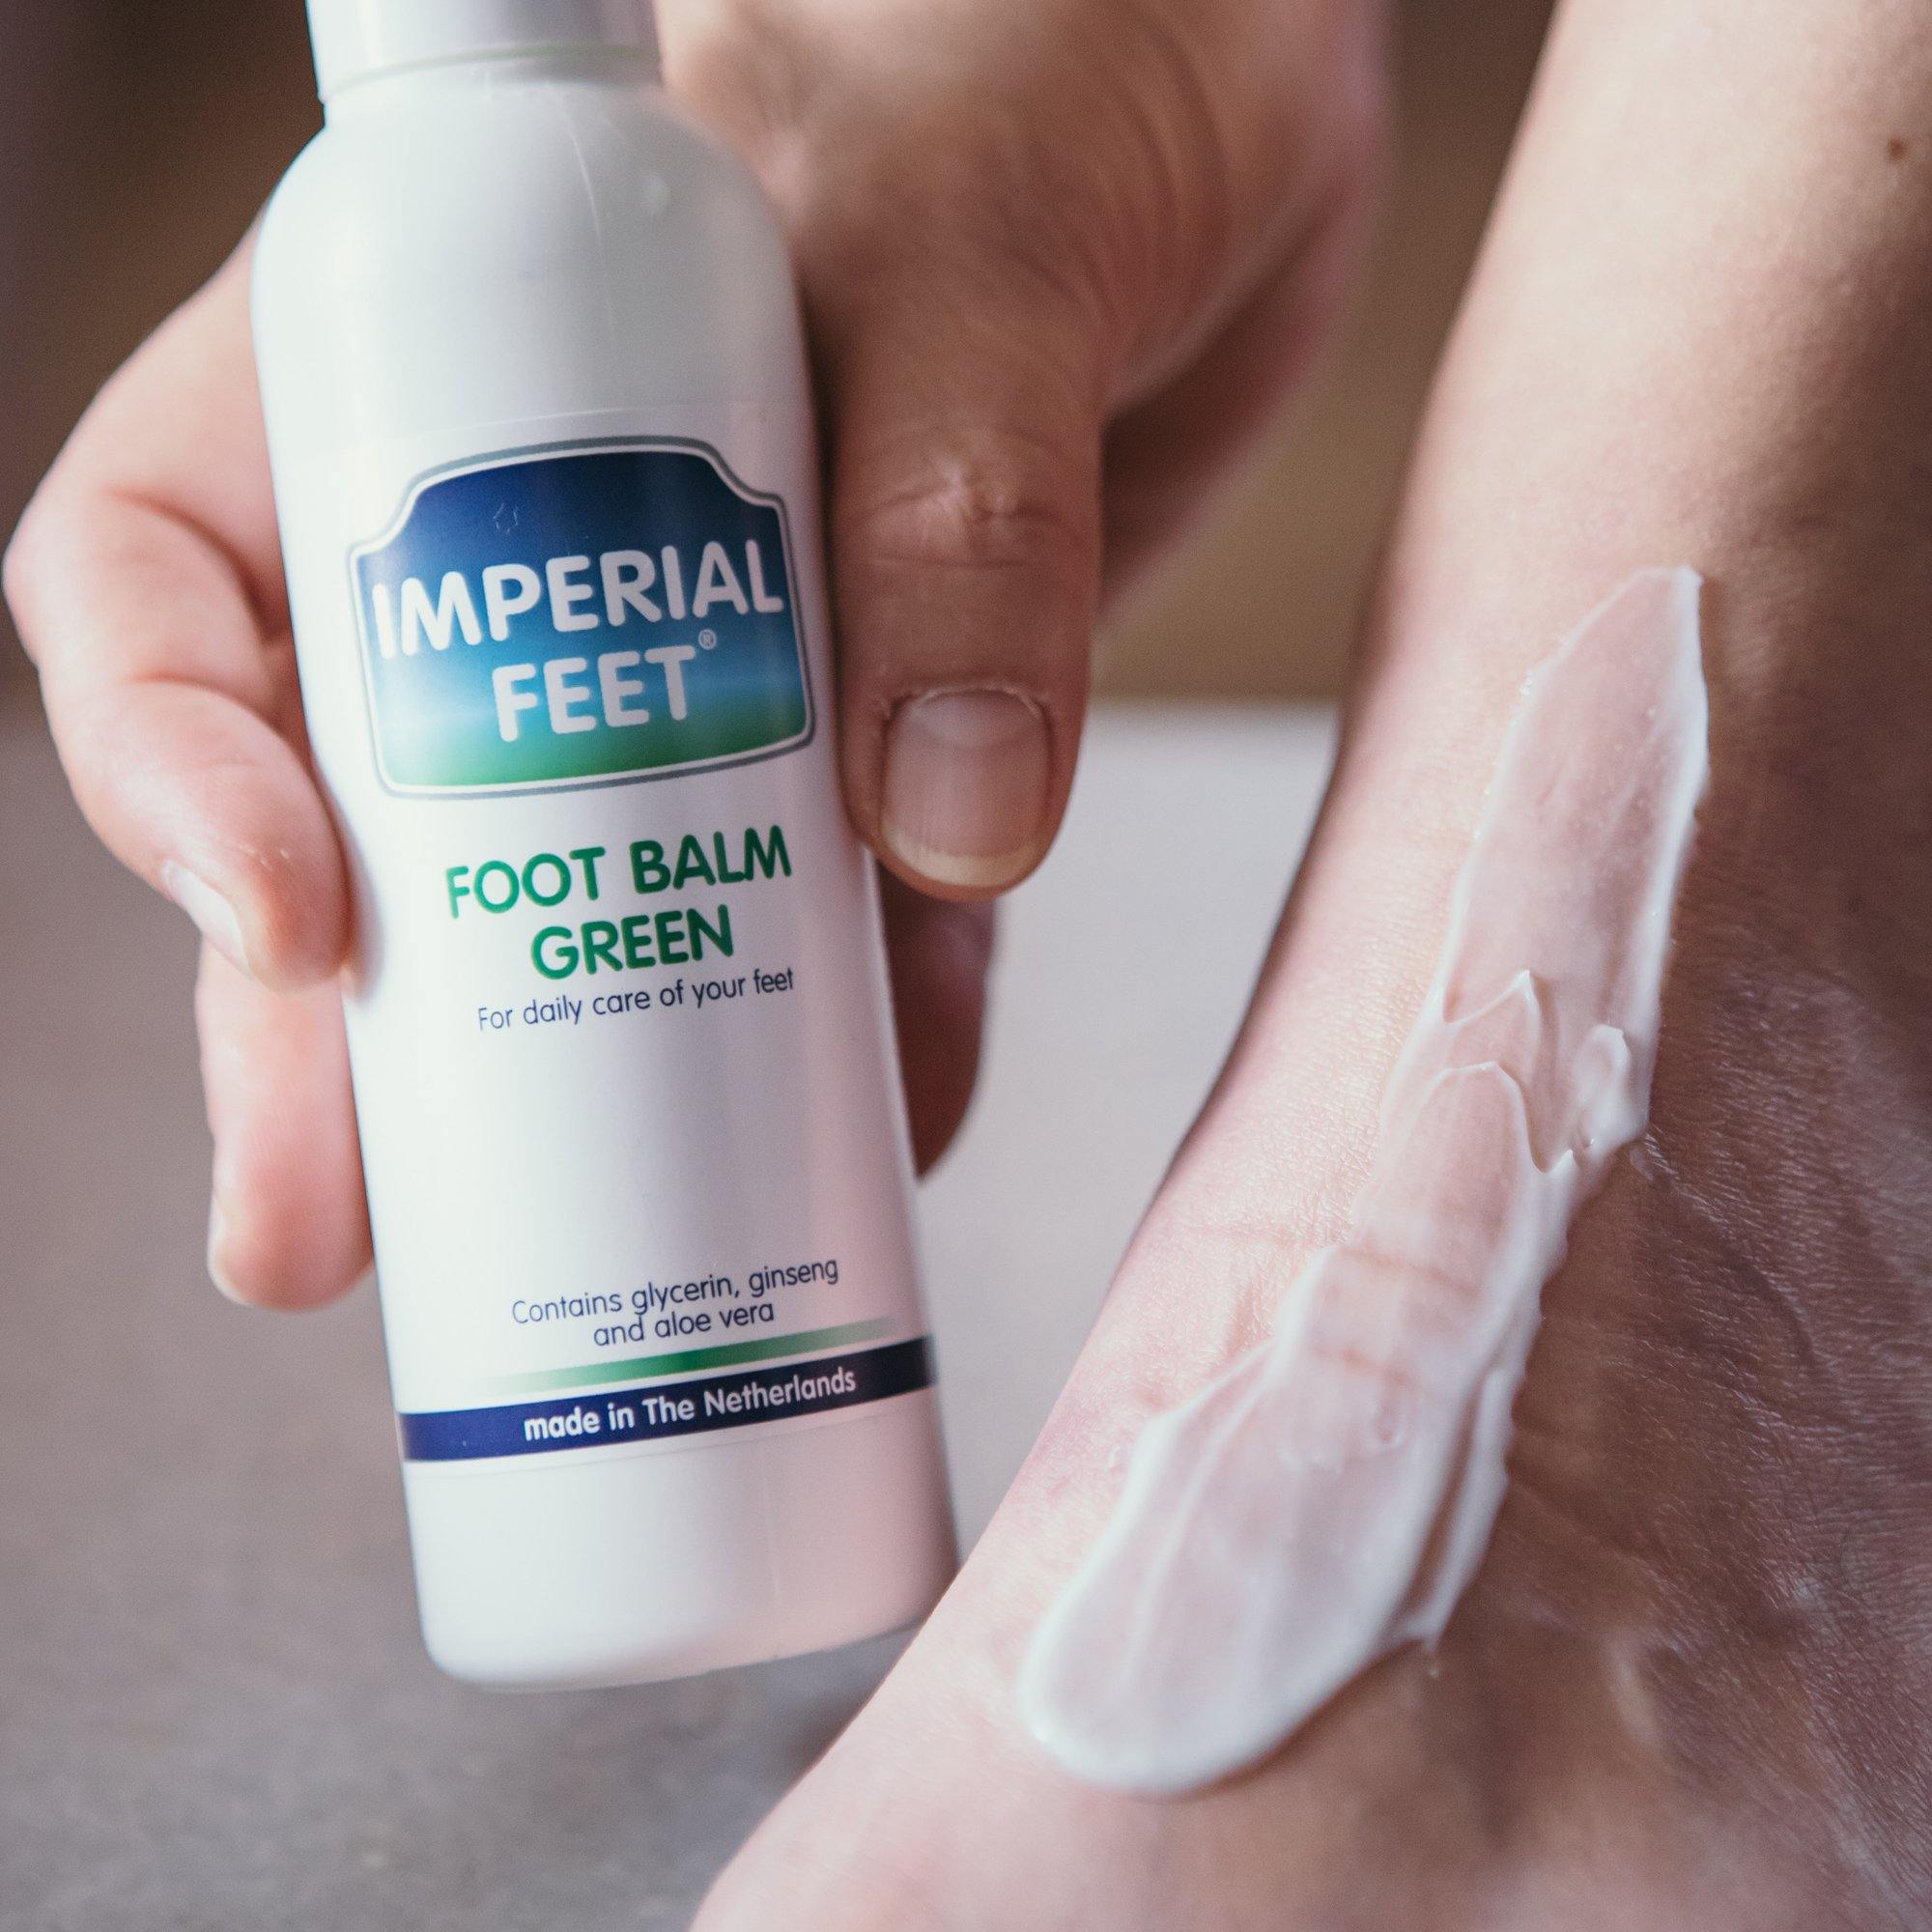 Foot Balm Green - Imperial Feet - Foot care products - Anti Fungal Treatments, B2C, Dry and Cracked Feet